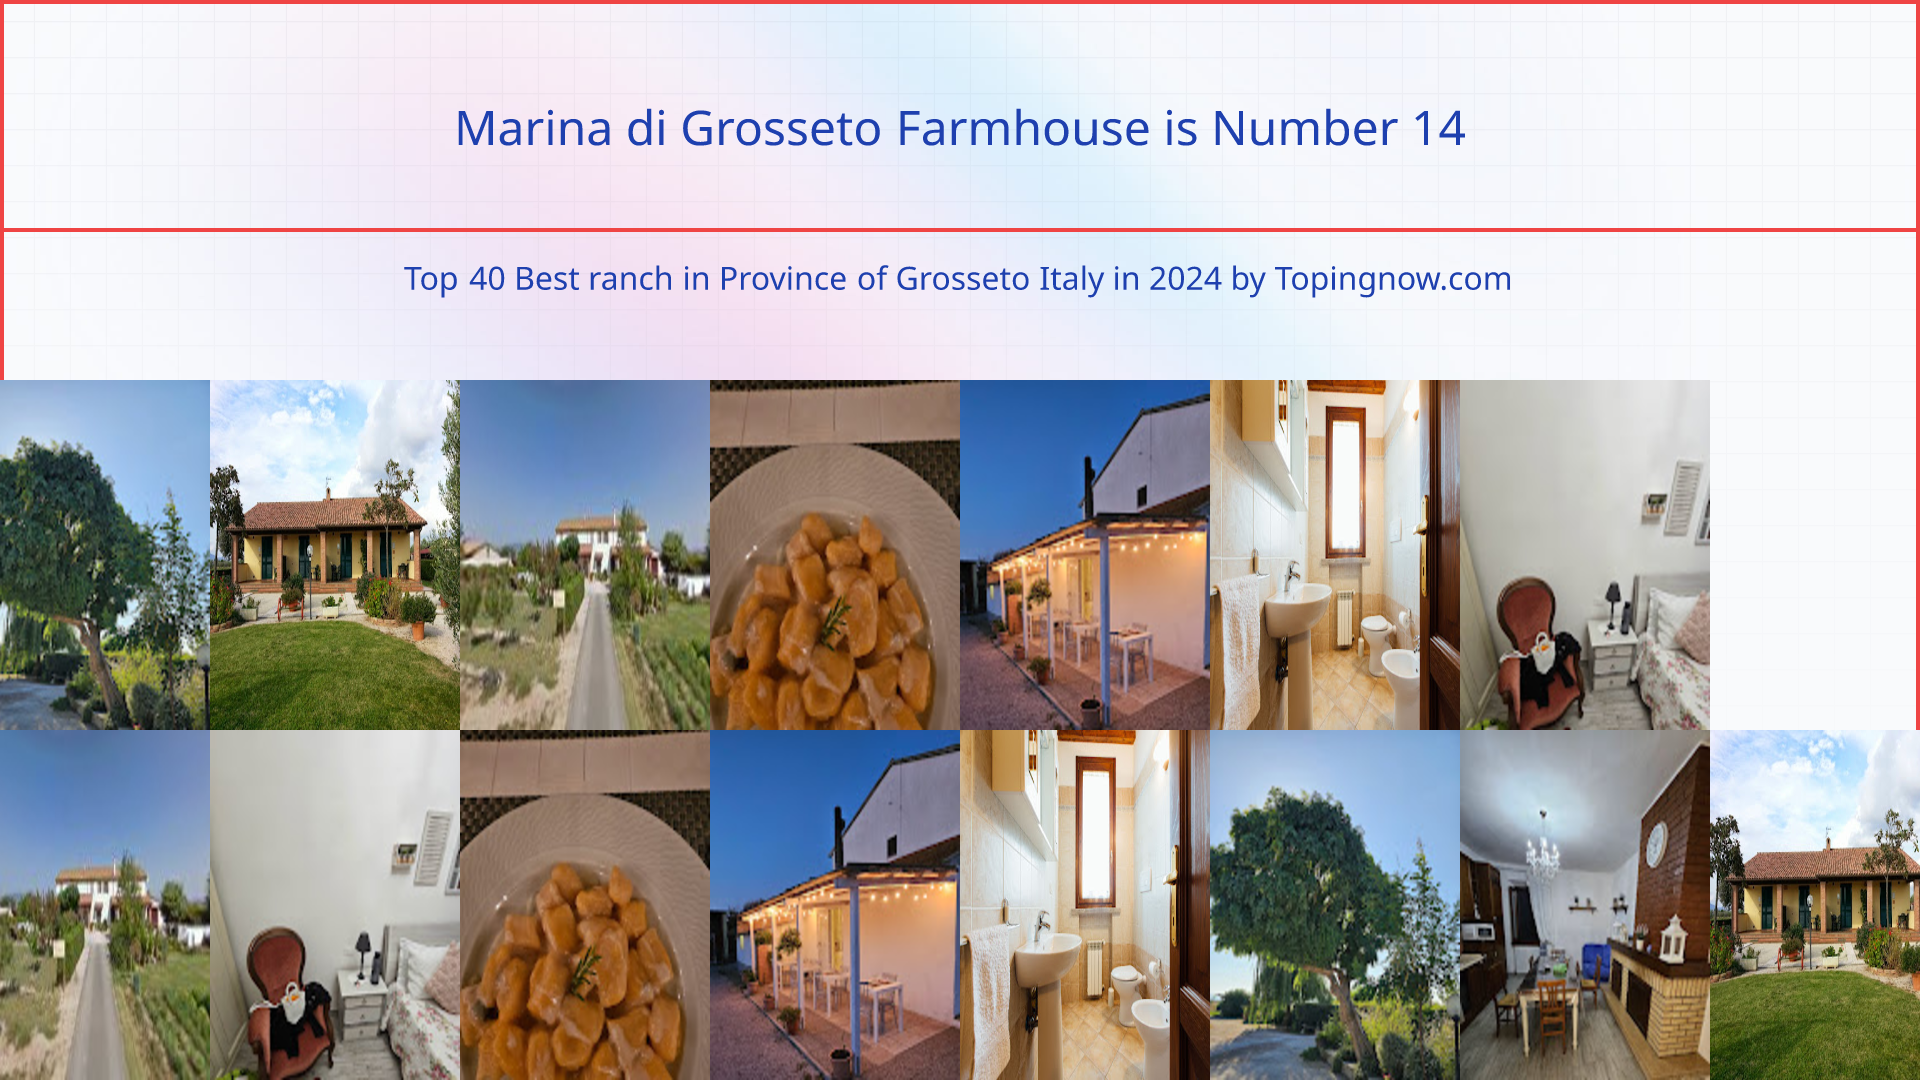 Marina di Grosseto Farmhouse: Top 40 Best ranch in Province of Grosseto Italy in 2024